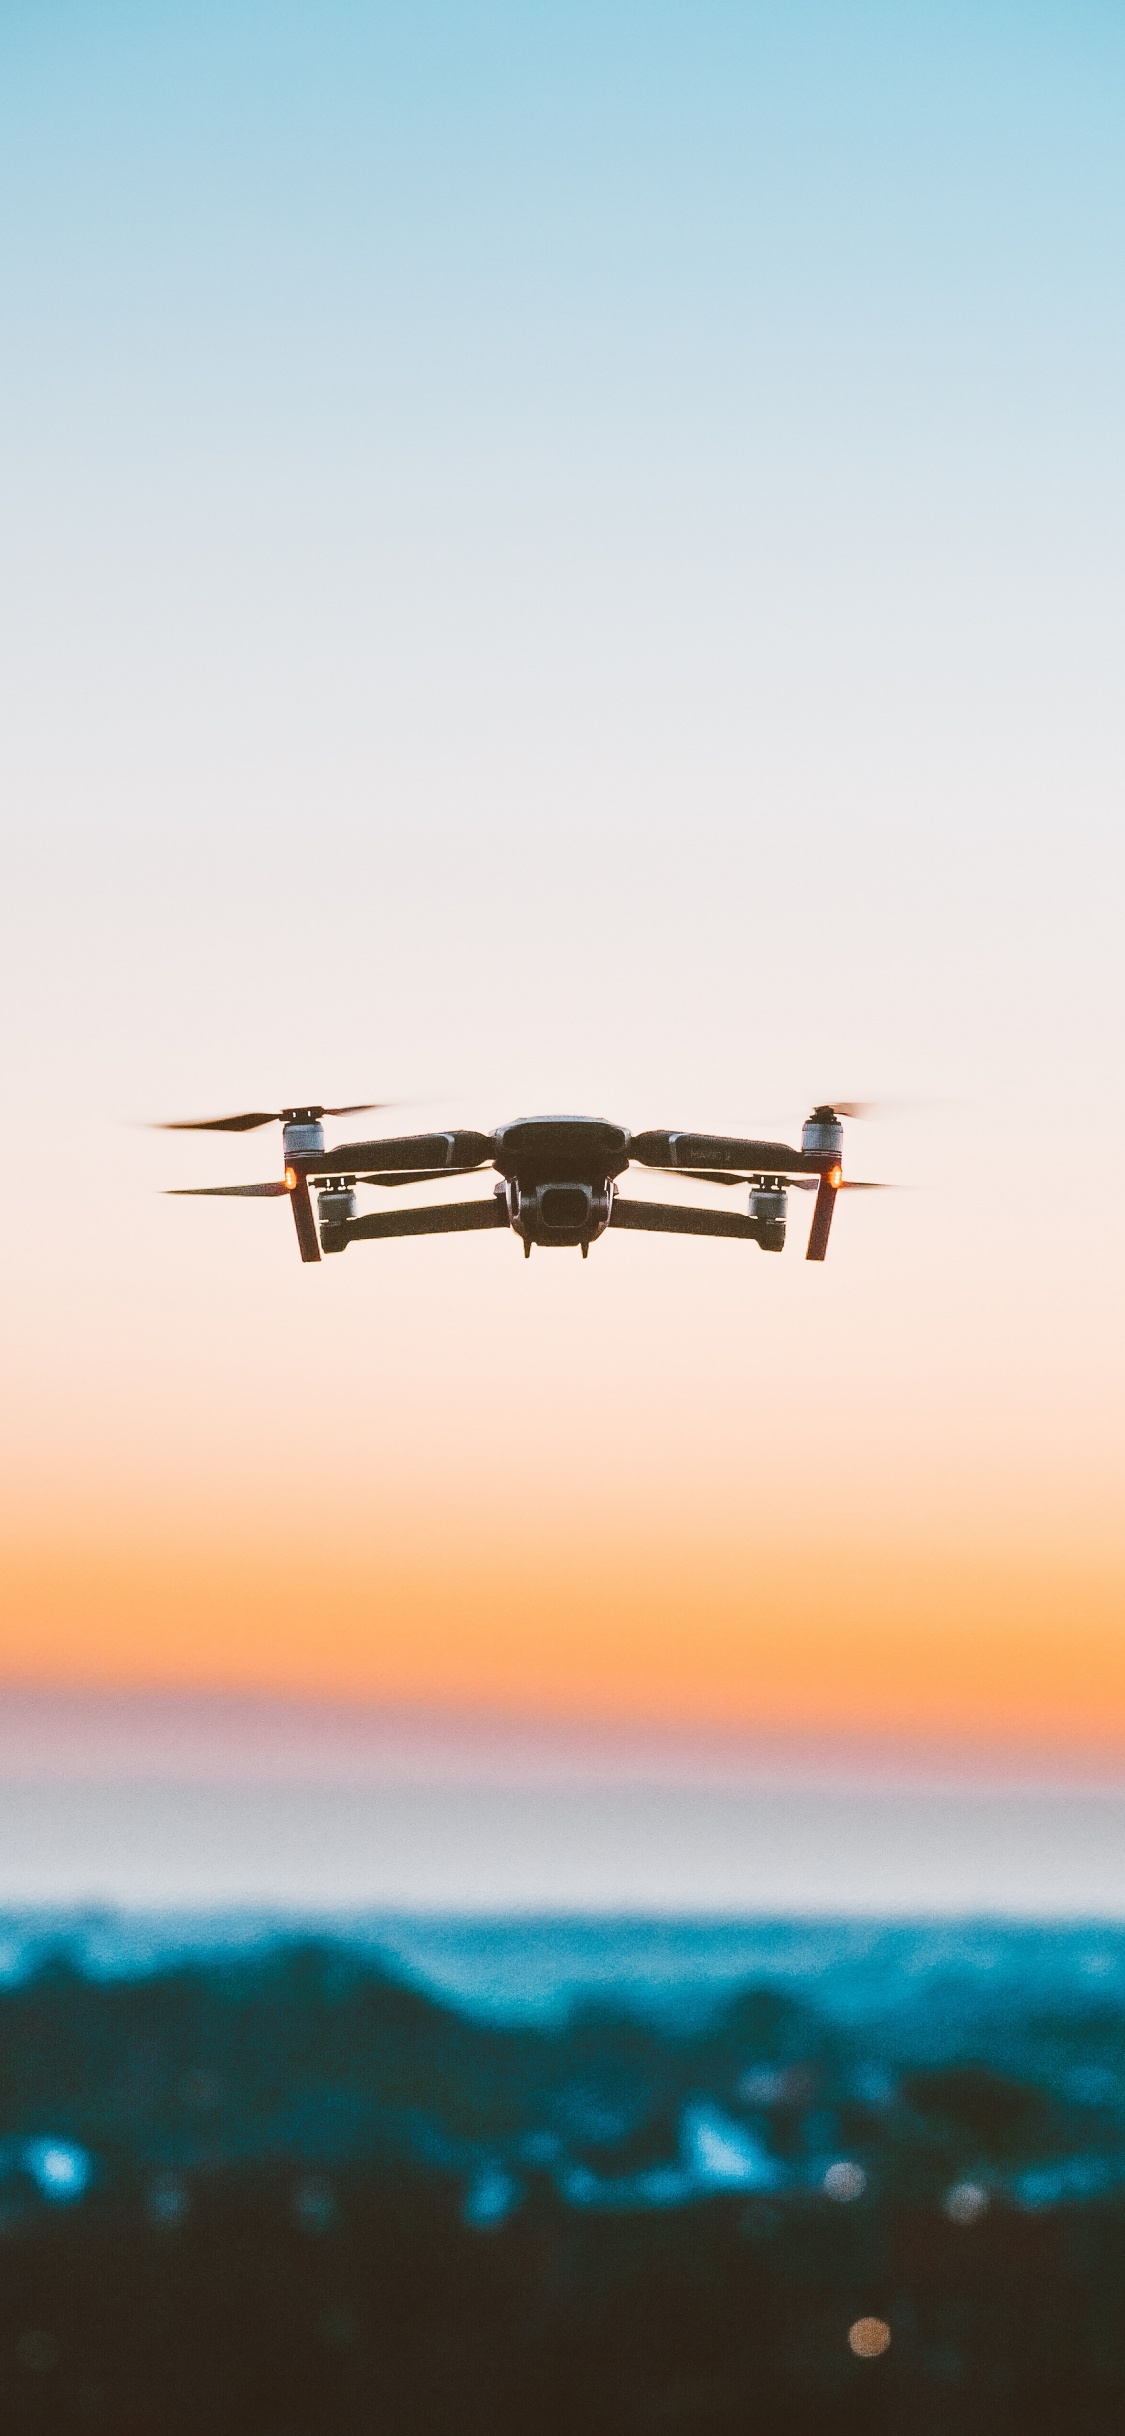 Black Drone Flying Over The Sea During Sunset. Wallpaper in 1125x2436 Resolution